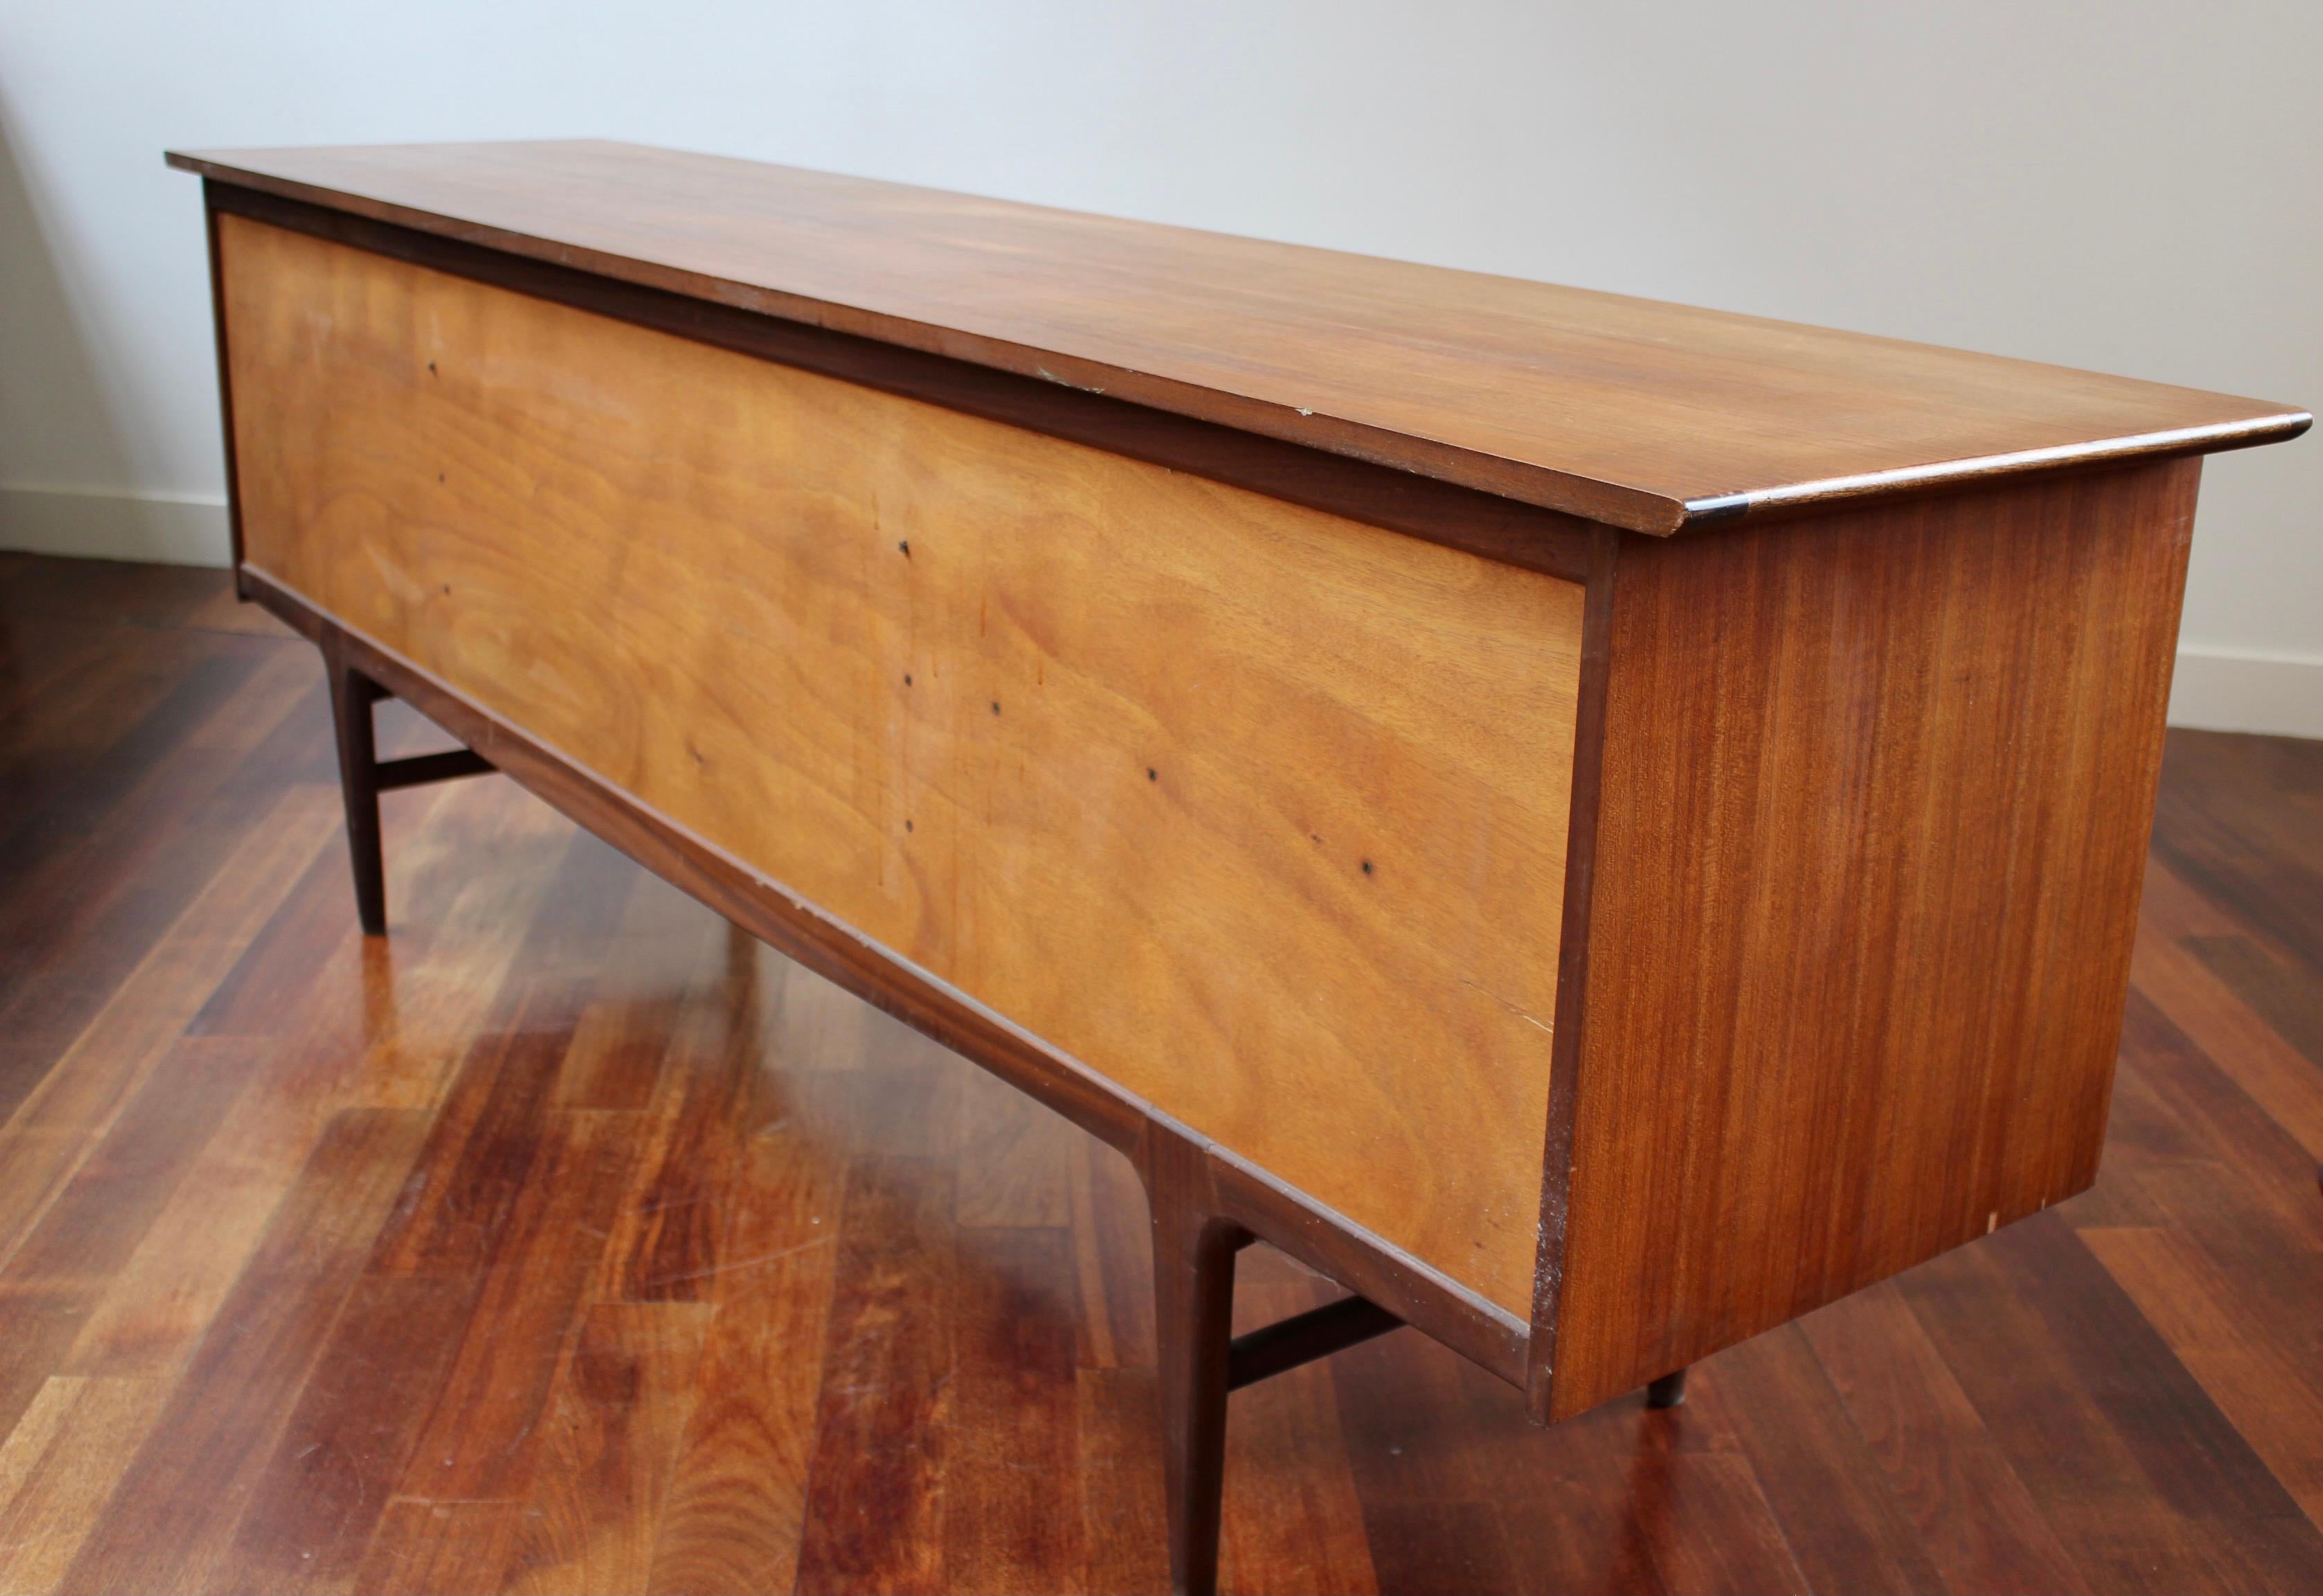 British 'Fonseca' Vintage Sideboard by John Herbert for A. Younger Ltd. 'circa 1950s'